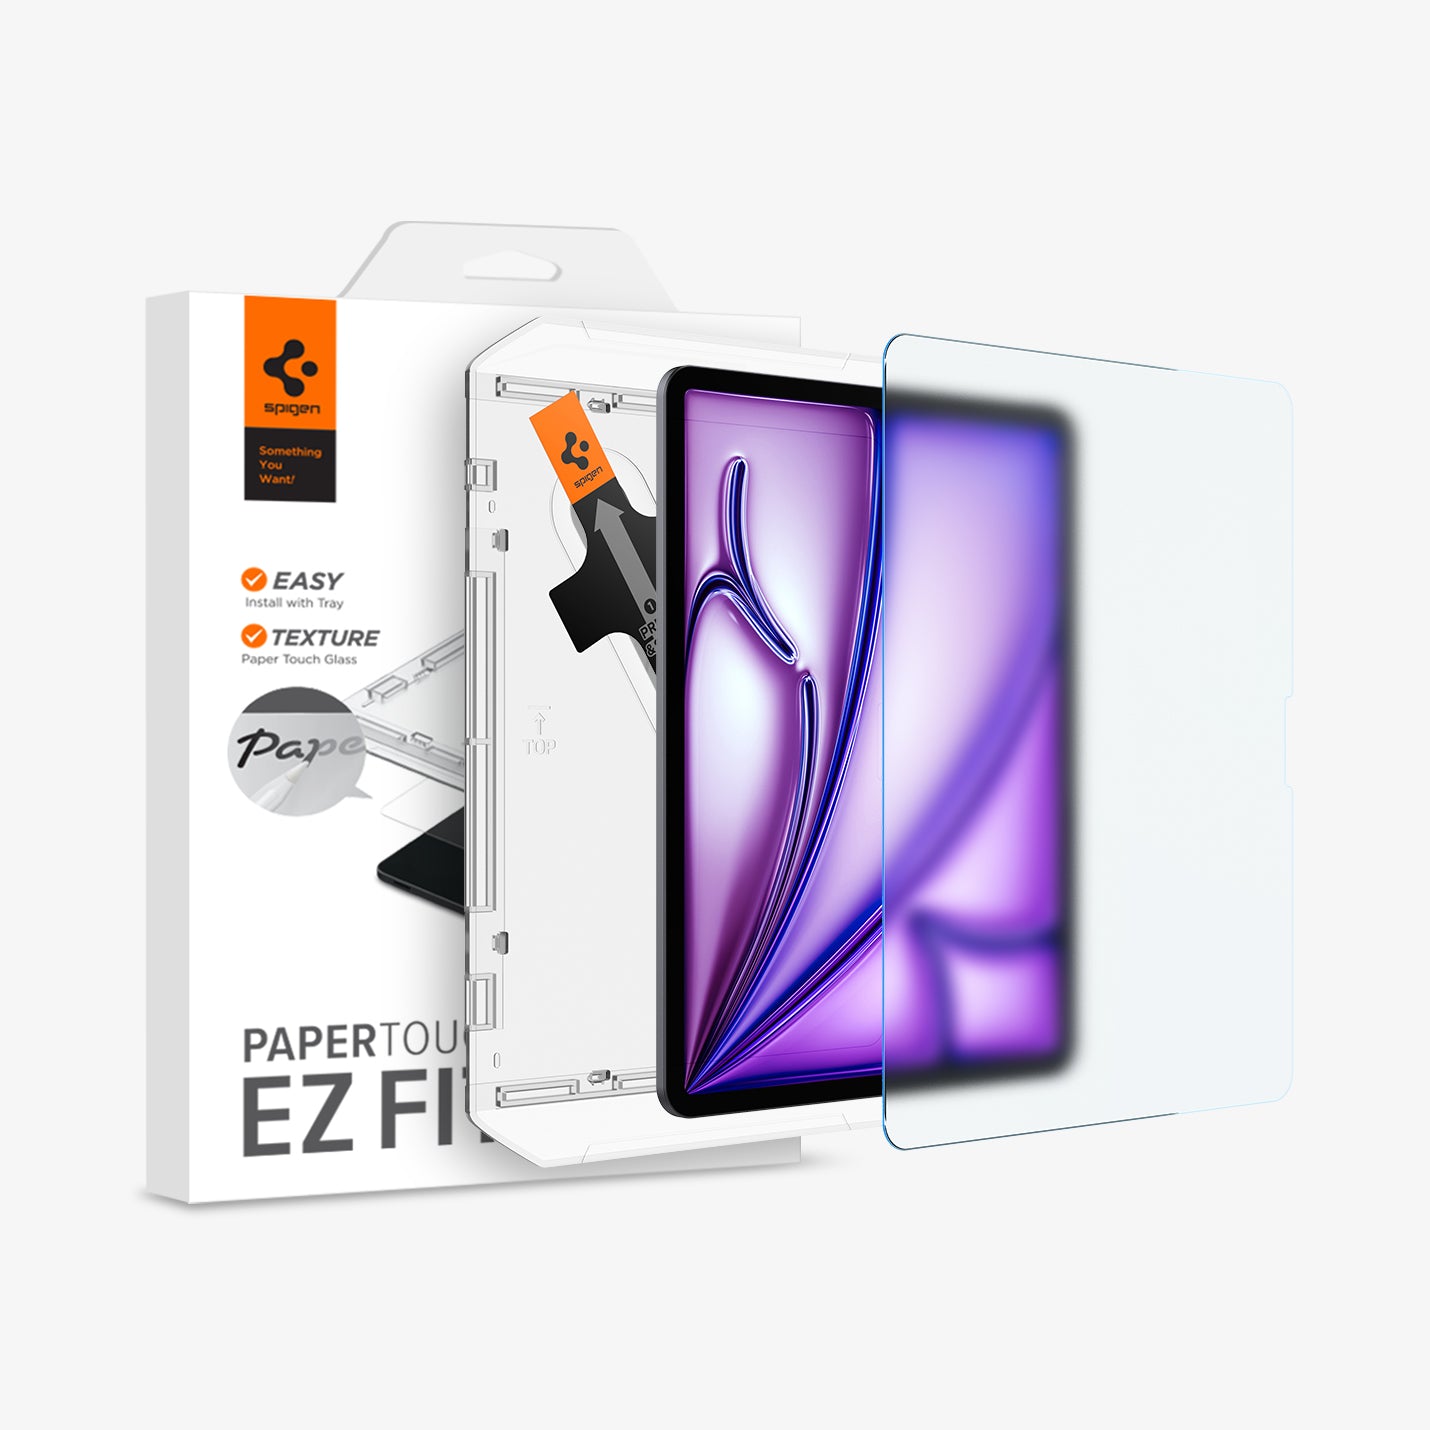 AGL07804 - iPad Air 12.9-inch Paper Touch EZ Fit in Clear showing the screen protector hovering in front of the device, ez fit tray and packaging